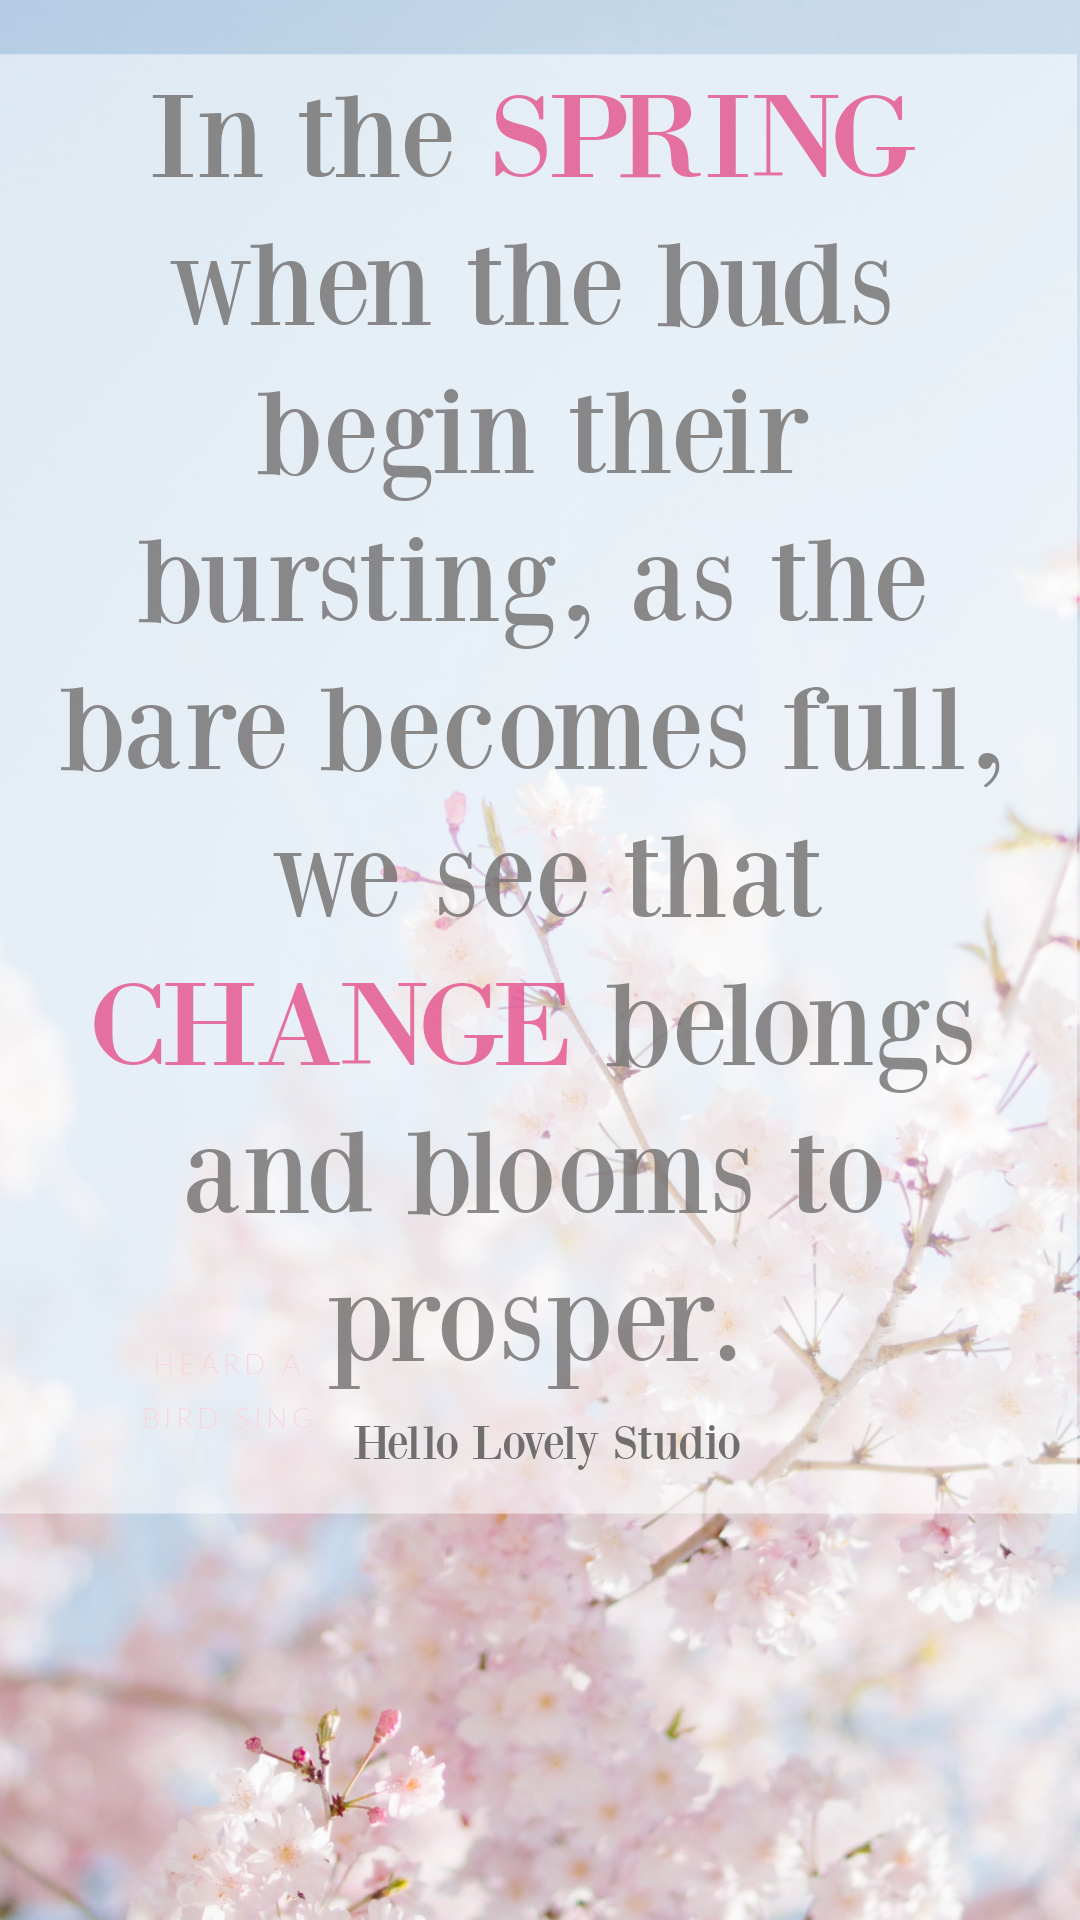 Spring quotes inspirational to welcome hope and encourage wholeness - Hello Lovely Studio. #springquotes #personalgrowthquotes